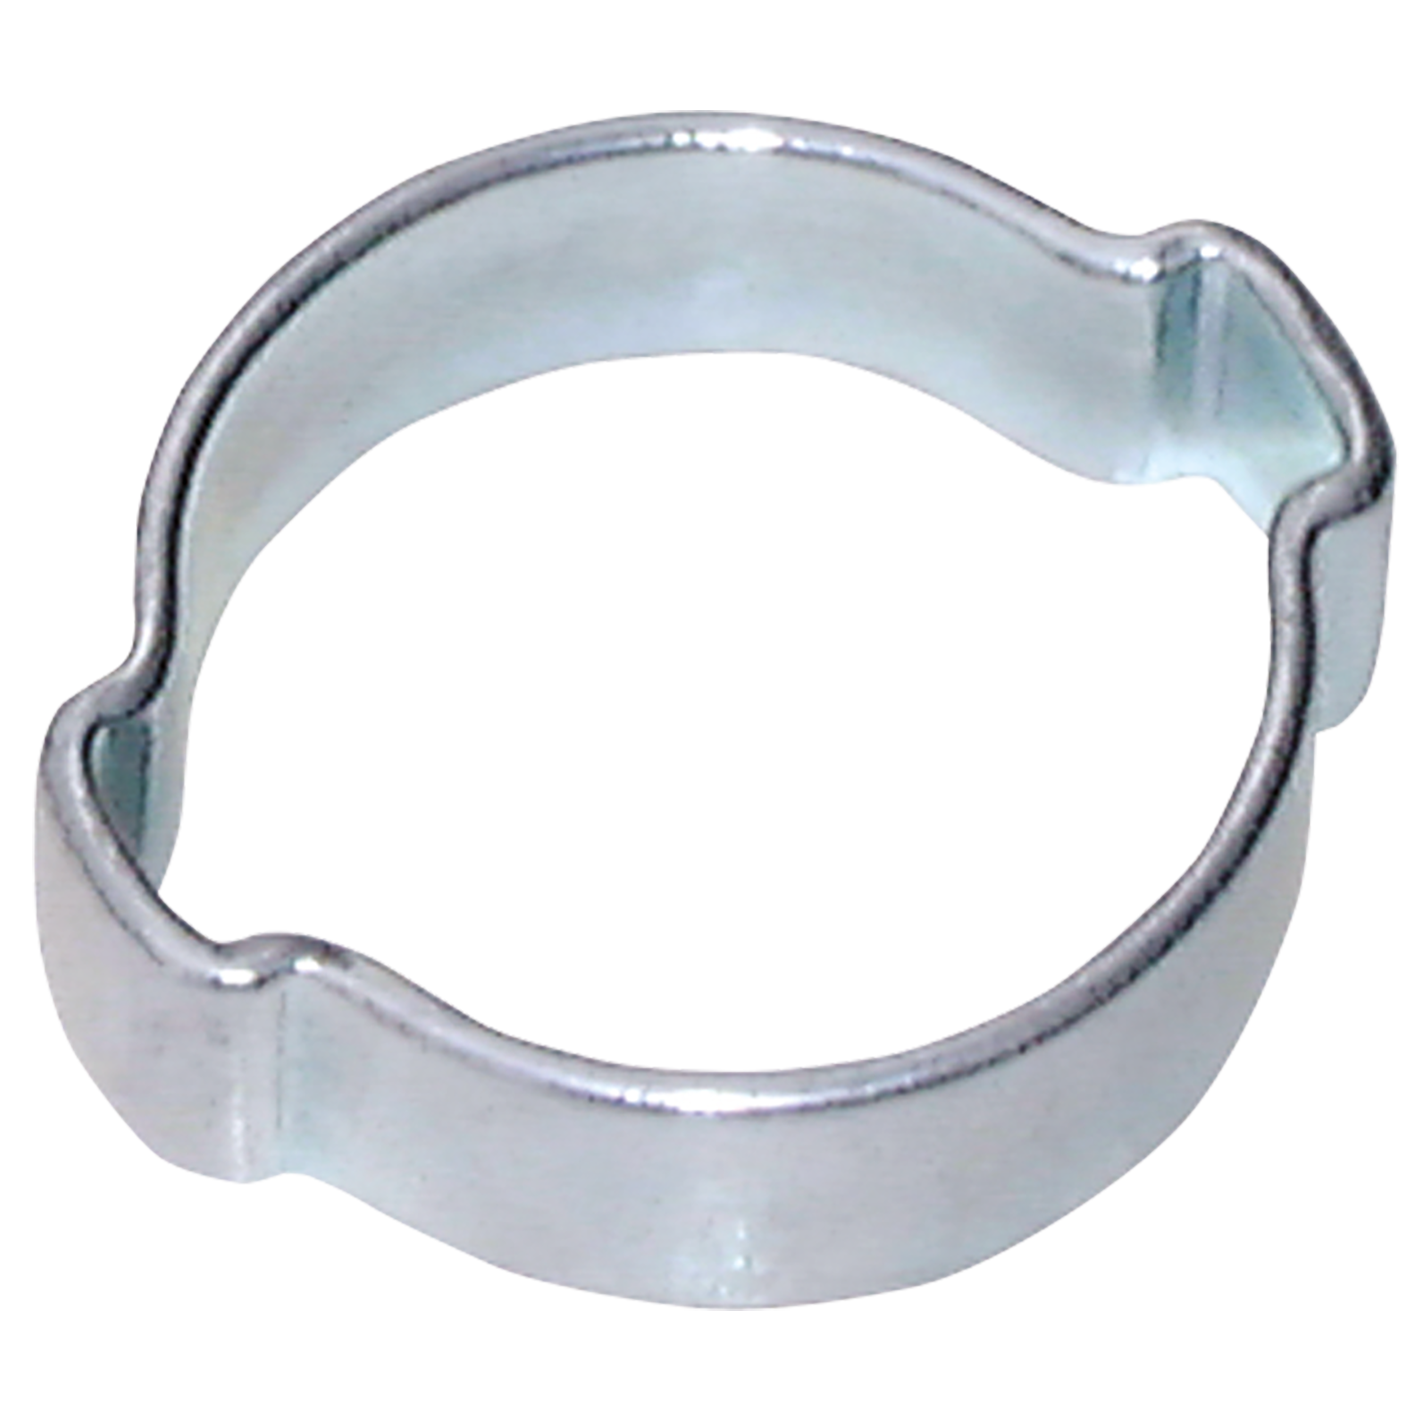 23.0-27.0MM 2-EAR STEEL CLAMP PLATED